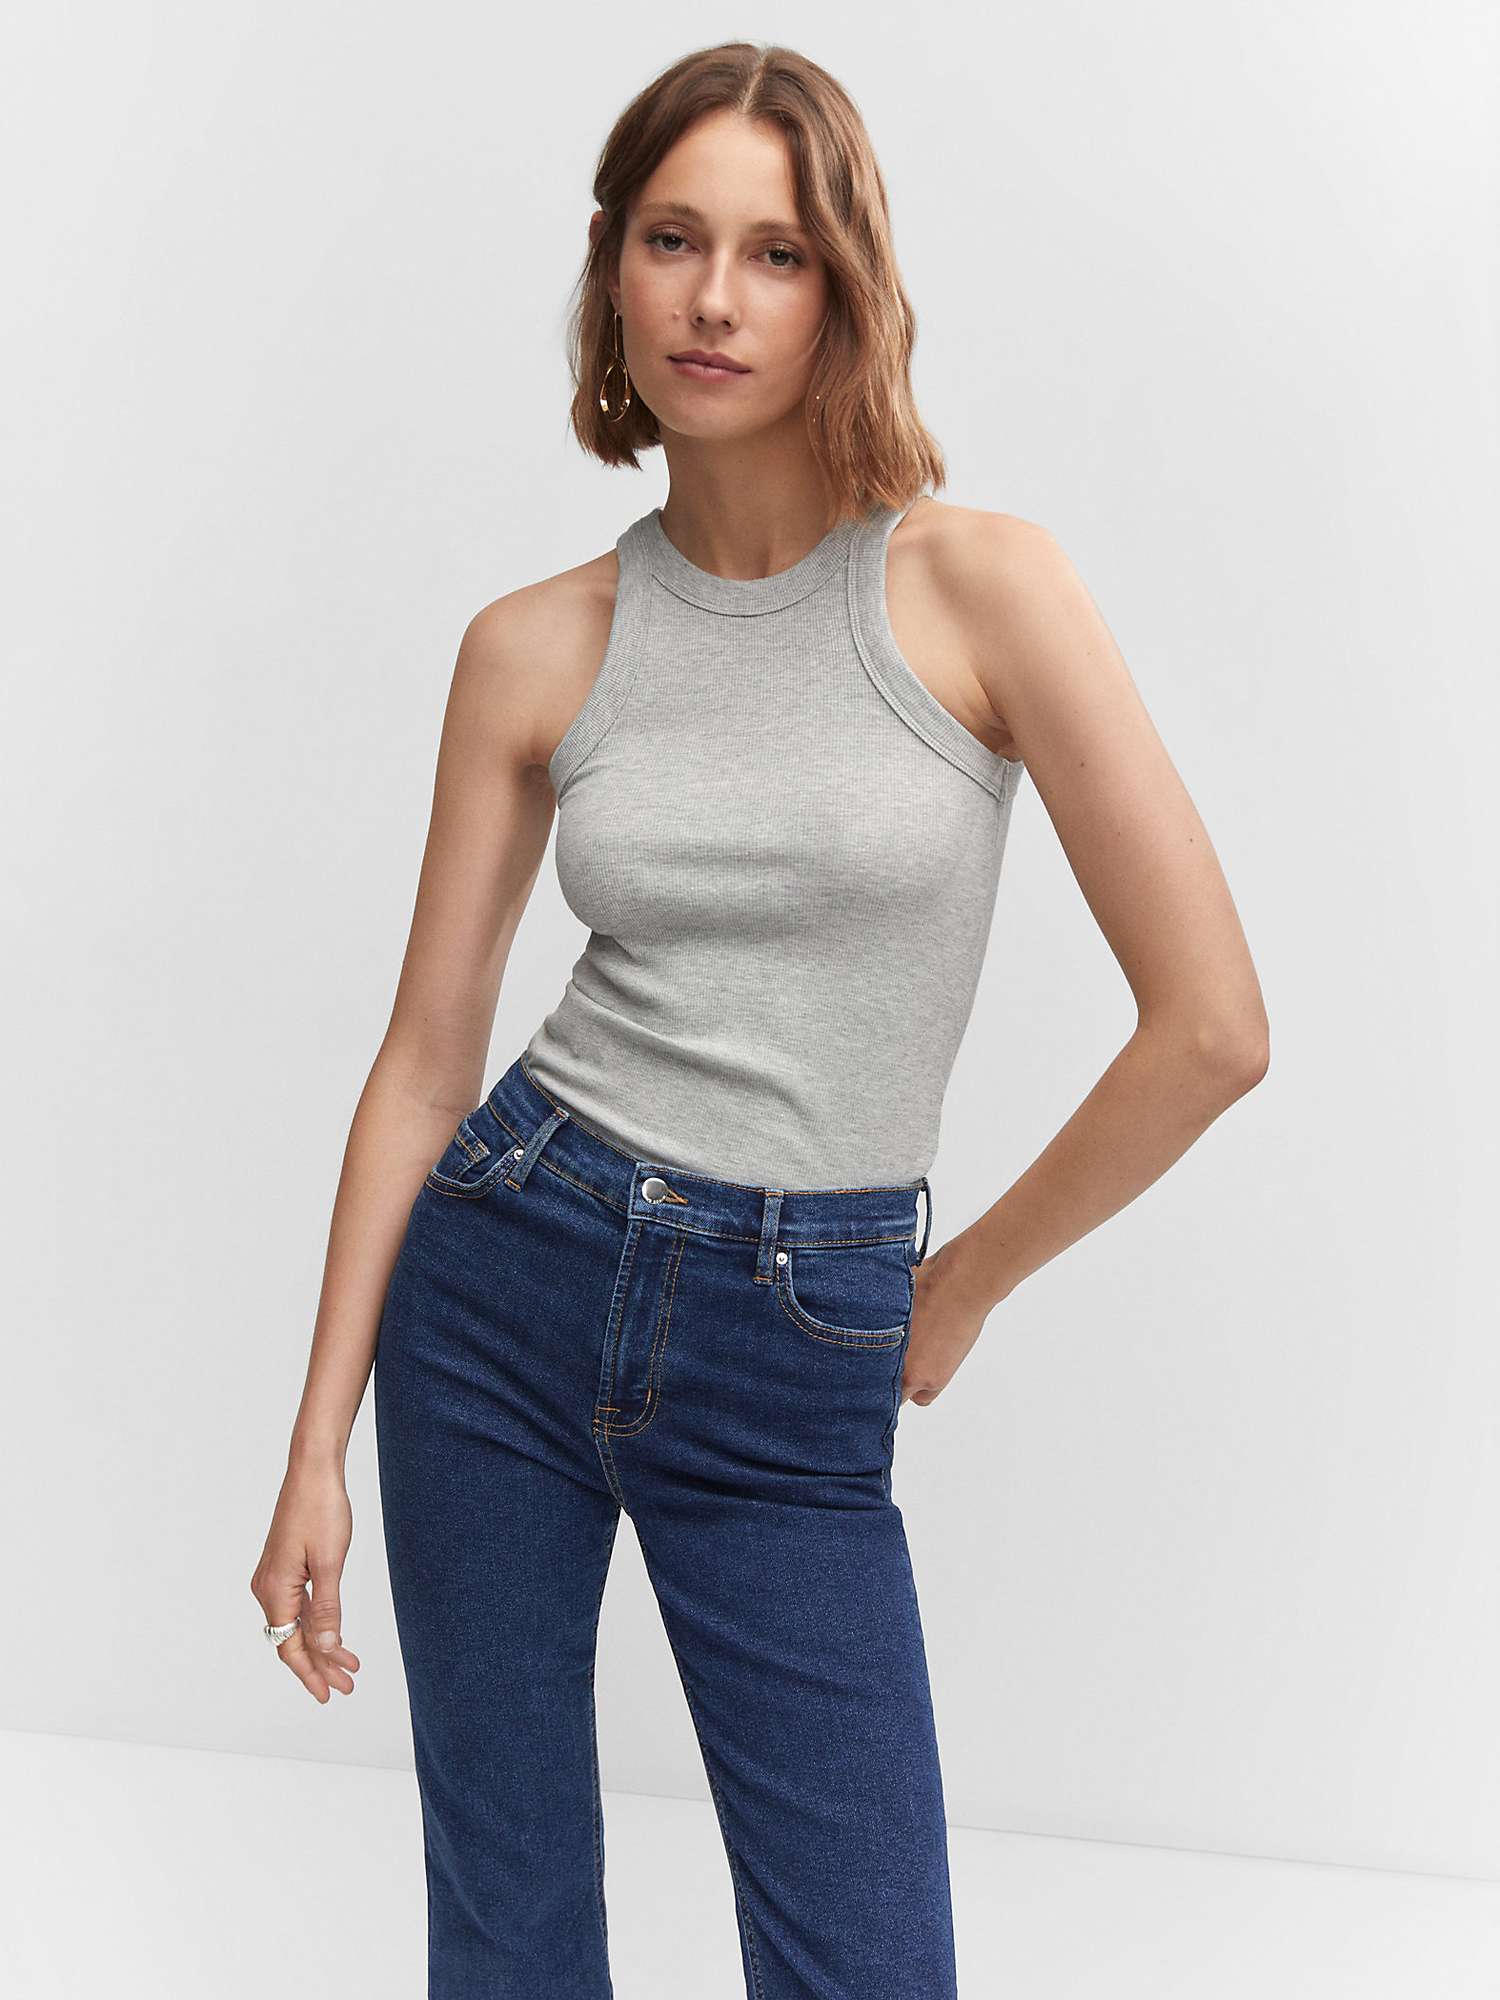 Buy Mango Sienne Cropped Flared Jeans, Open Blue Online at johnlewis.com